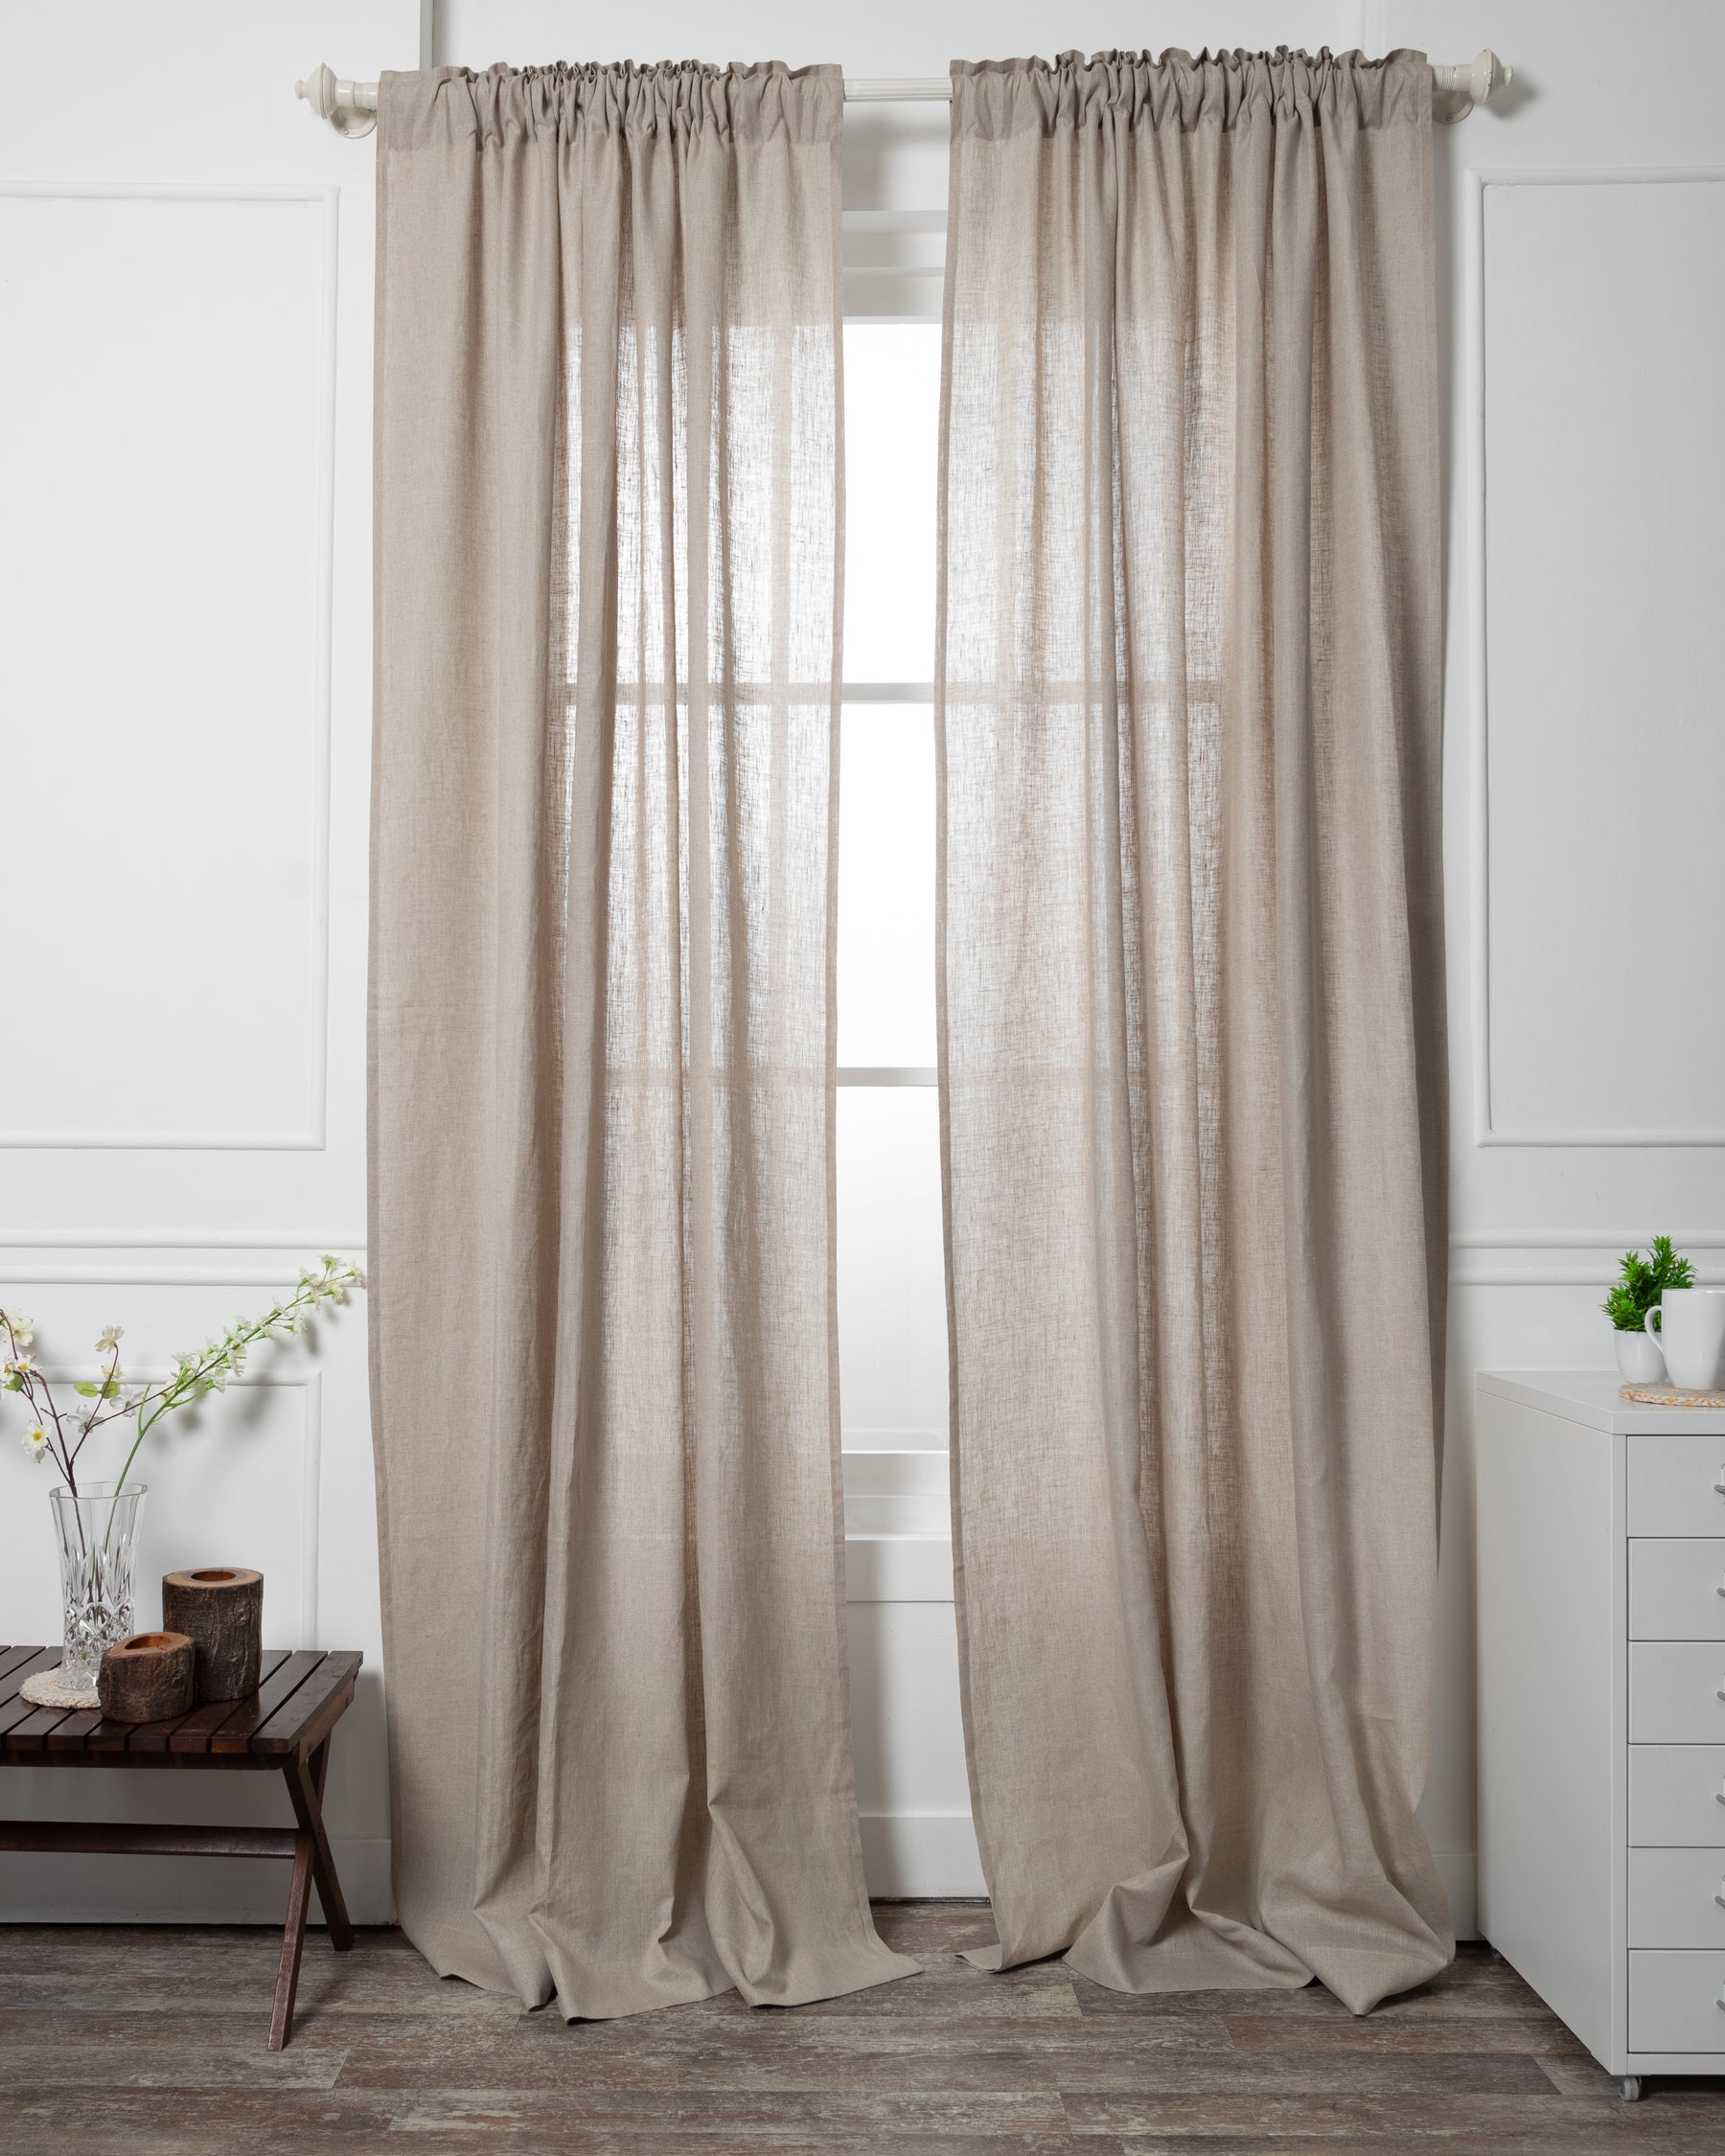 Natural Linen Curtains - Luxe